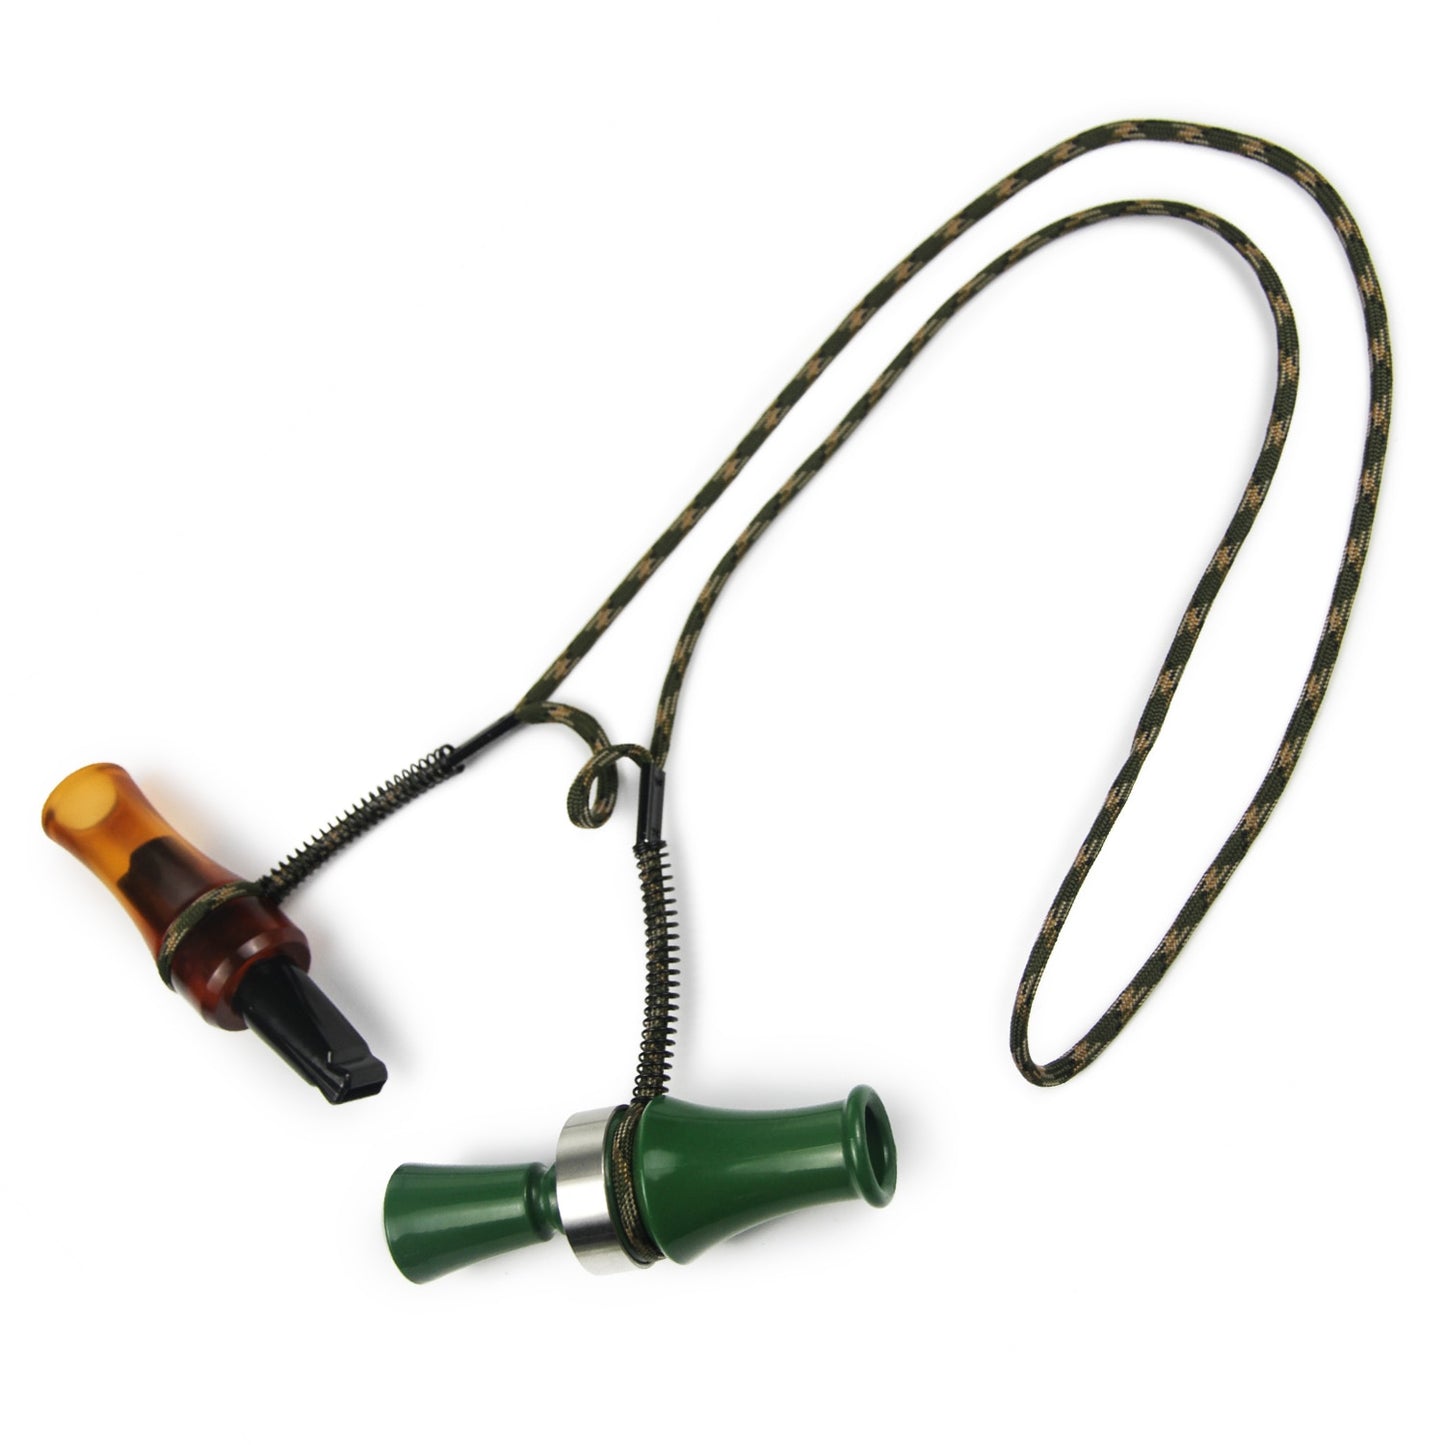 Hunting Duck Call Lanyard Hunting Decoys Rope for Mallard/Pheasant/Goose Whistle Paracord Rope Hunter Game Outdoor Hunting Goods